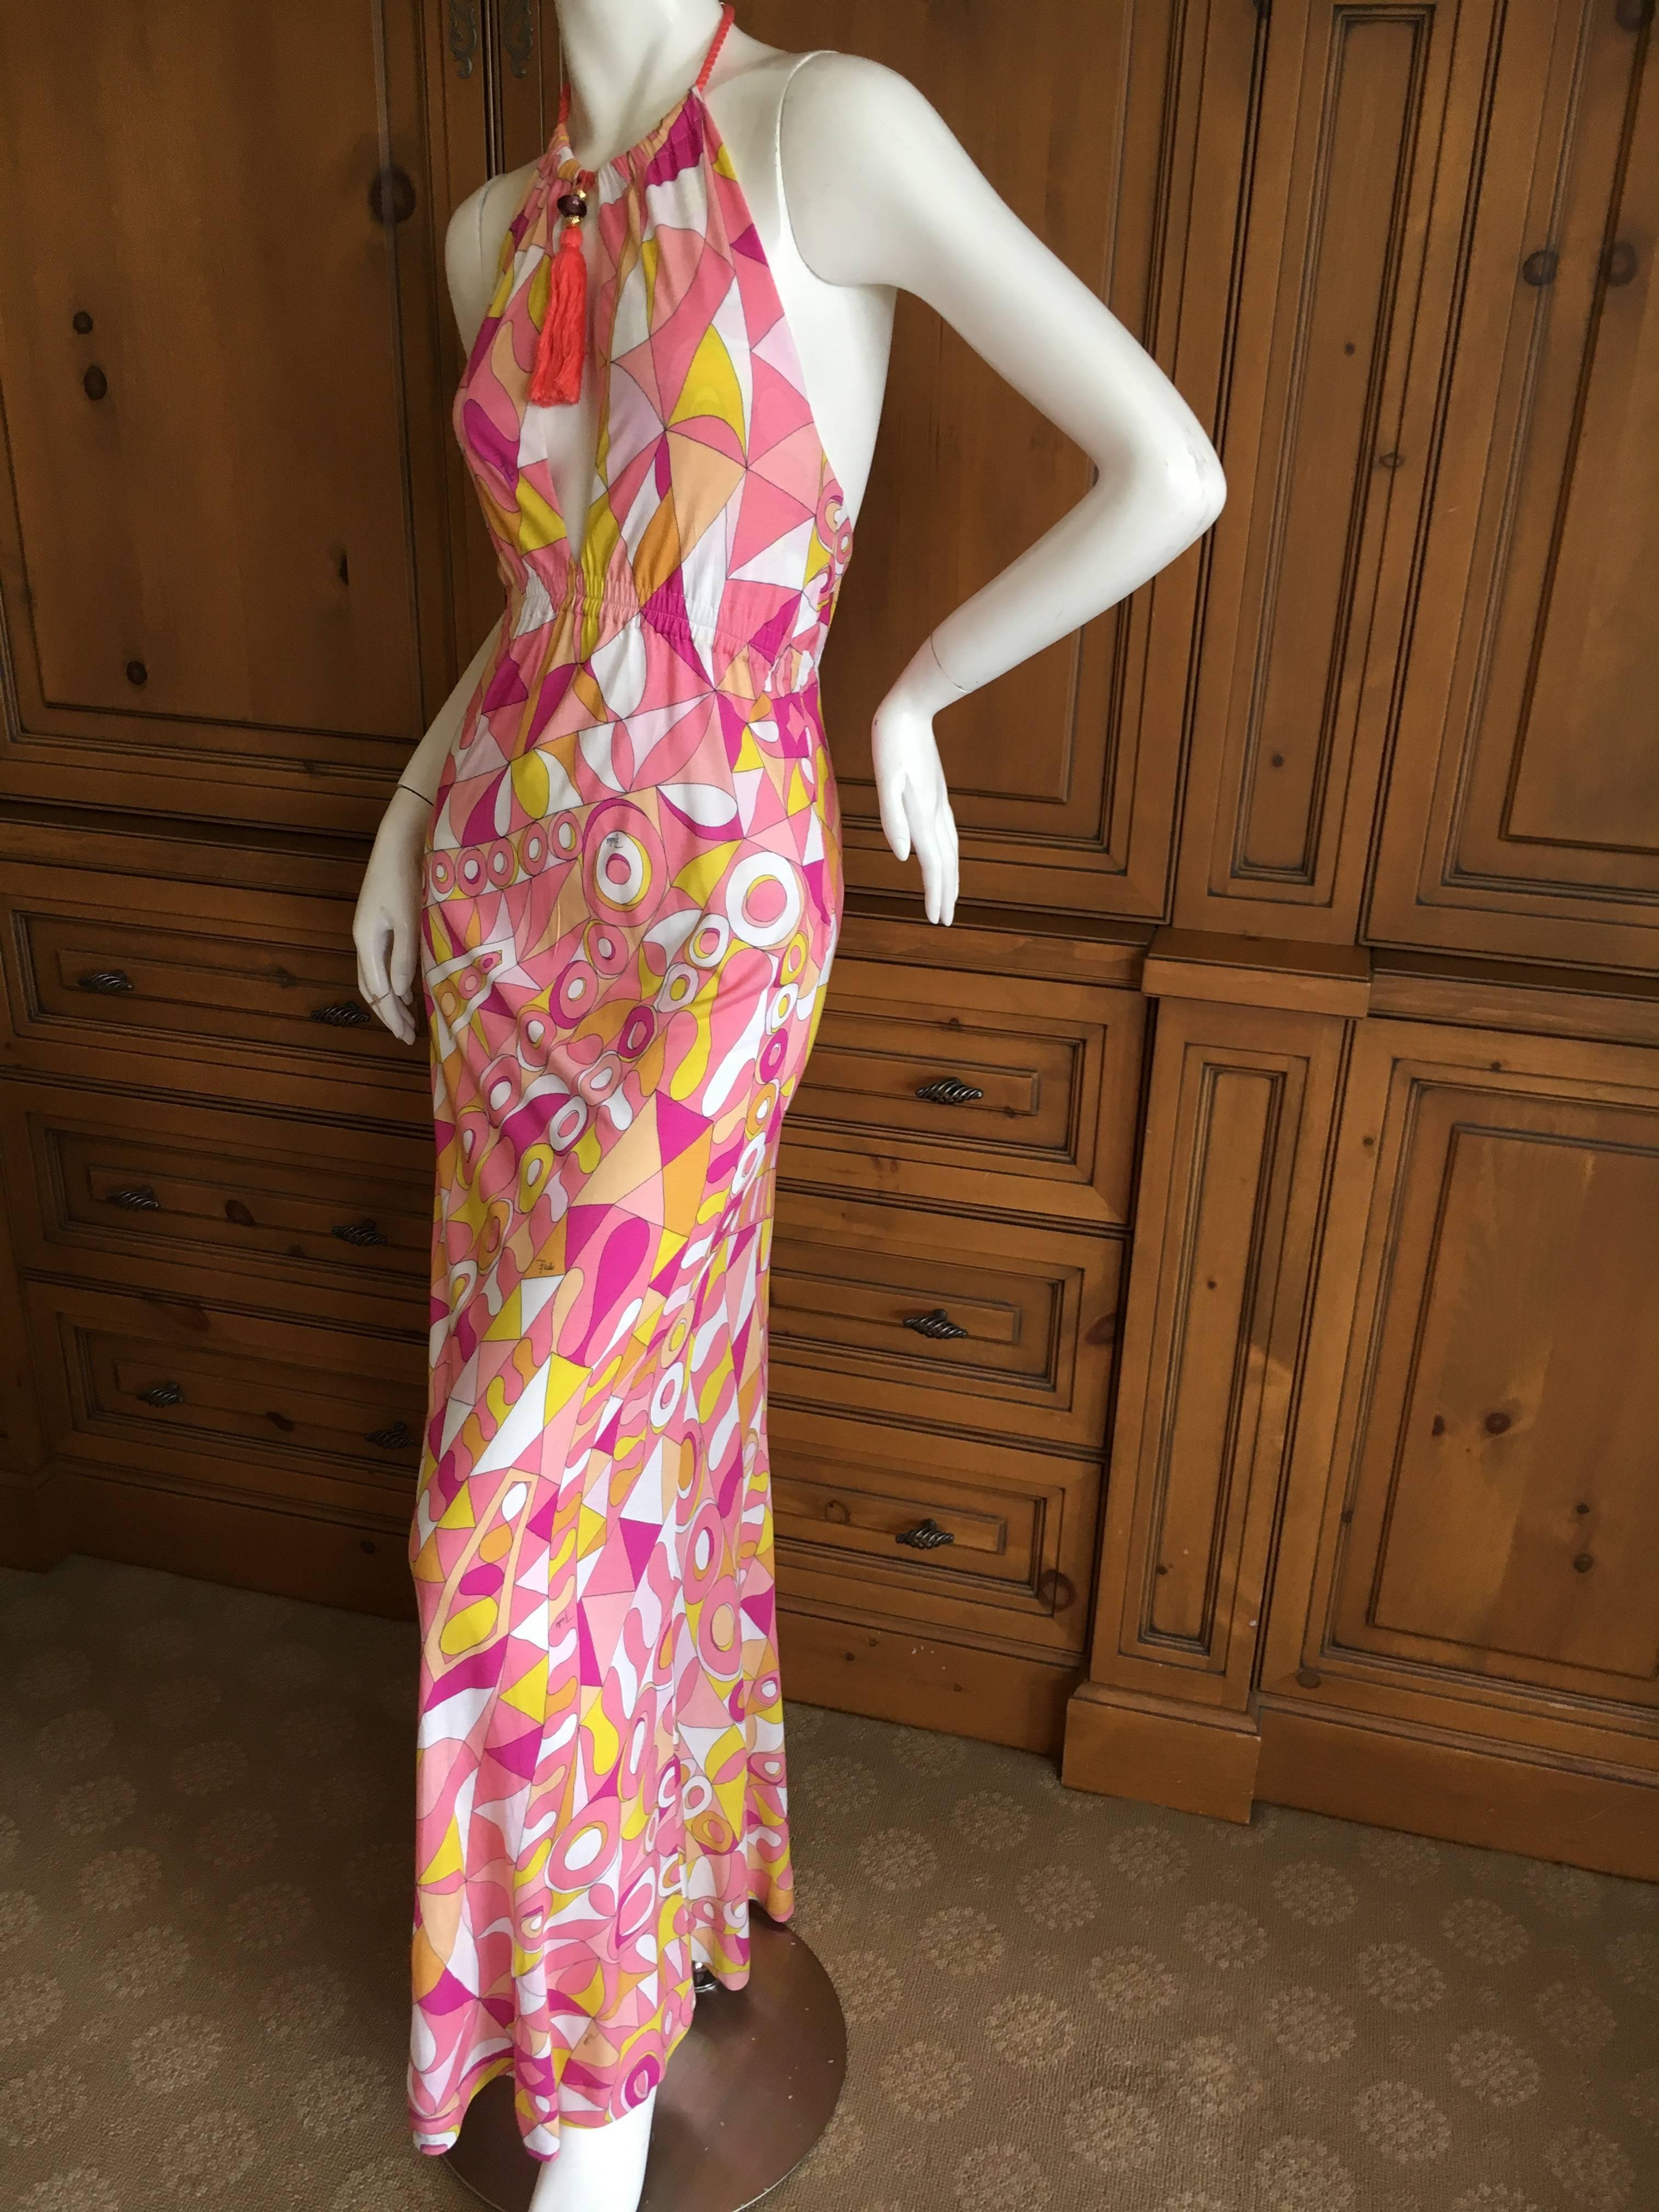 Wonderful long halter dress with attached tassel necklace from Emelio Pucci.
Perfect for a beach cover up, super thin viscose.
 So chic, so summery.
 Size 38 
Bust 36 " 
Waist 24"
 Hips 42" 
Length 62"
Excellent condition